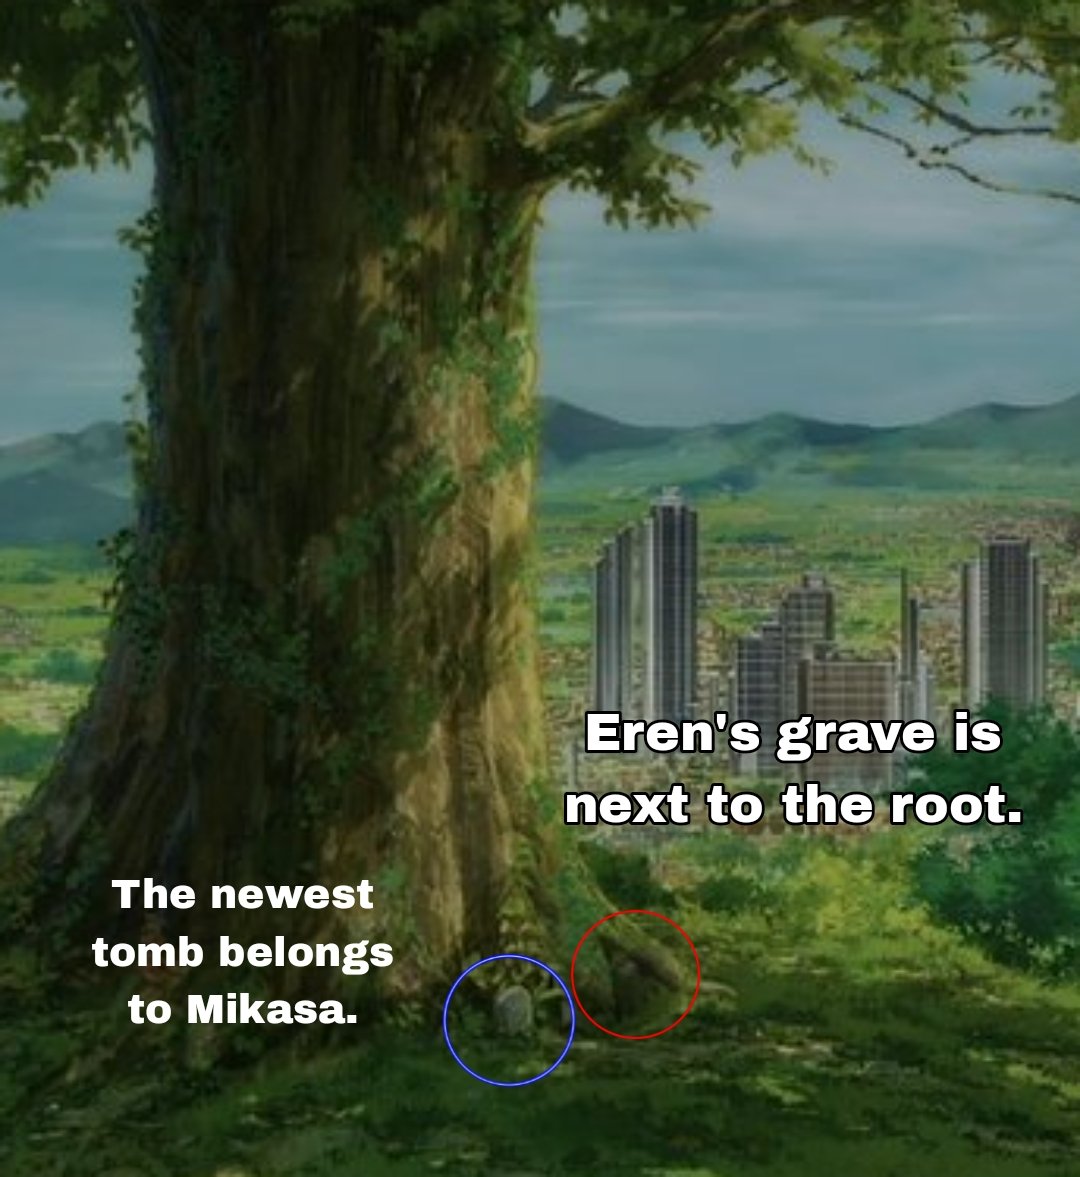 Mikasa was buried next to Eren, you can clearly see how Eren's grave coincides with the older grave in the second image, meanwhile there is another newer grave next to him. Remember that about 50 years have passed since Mikasa's death, Eren's tomb was more than 100 years old.